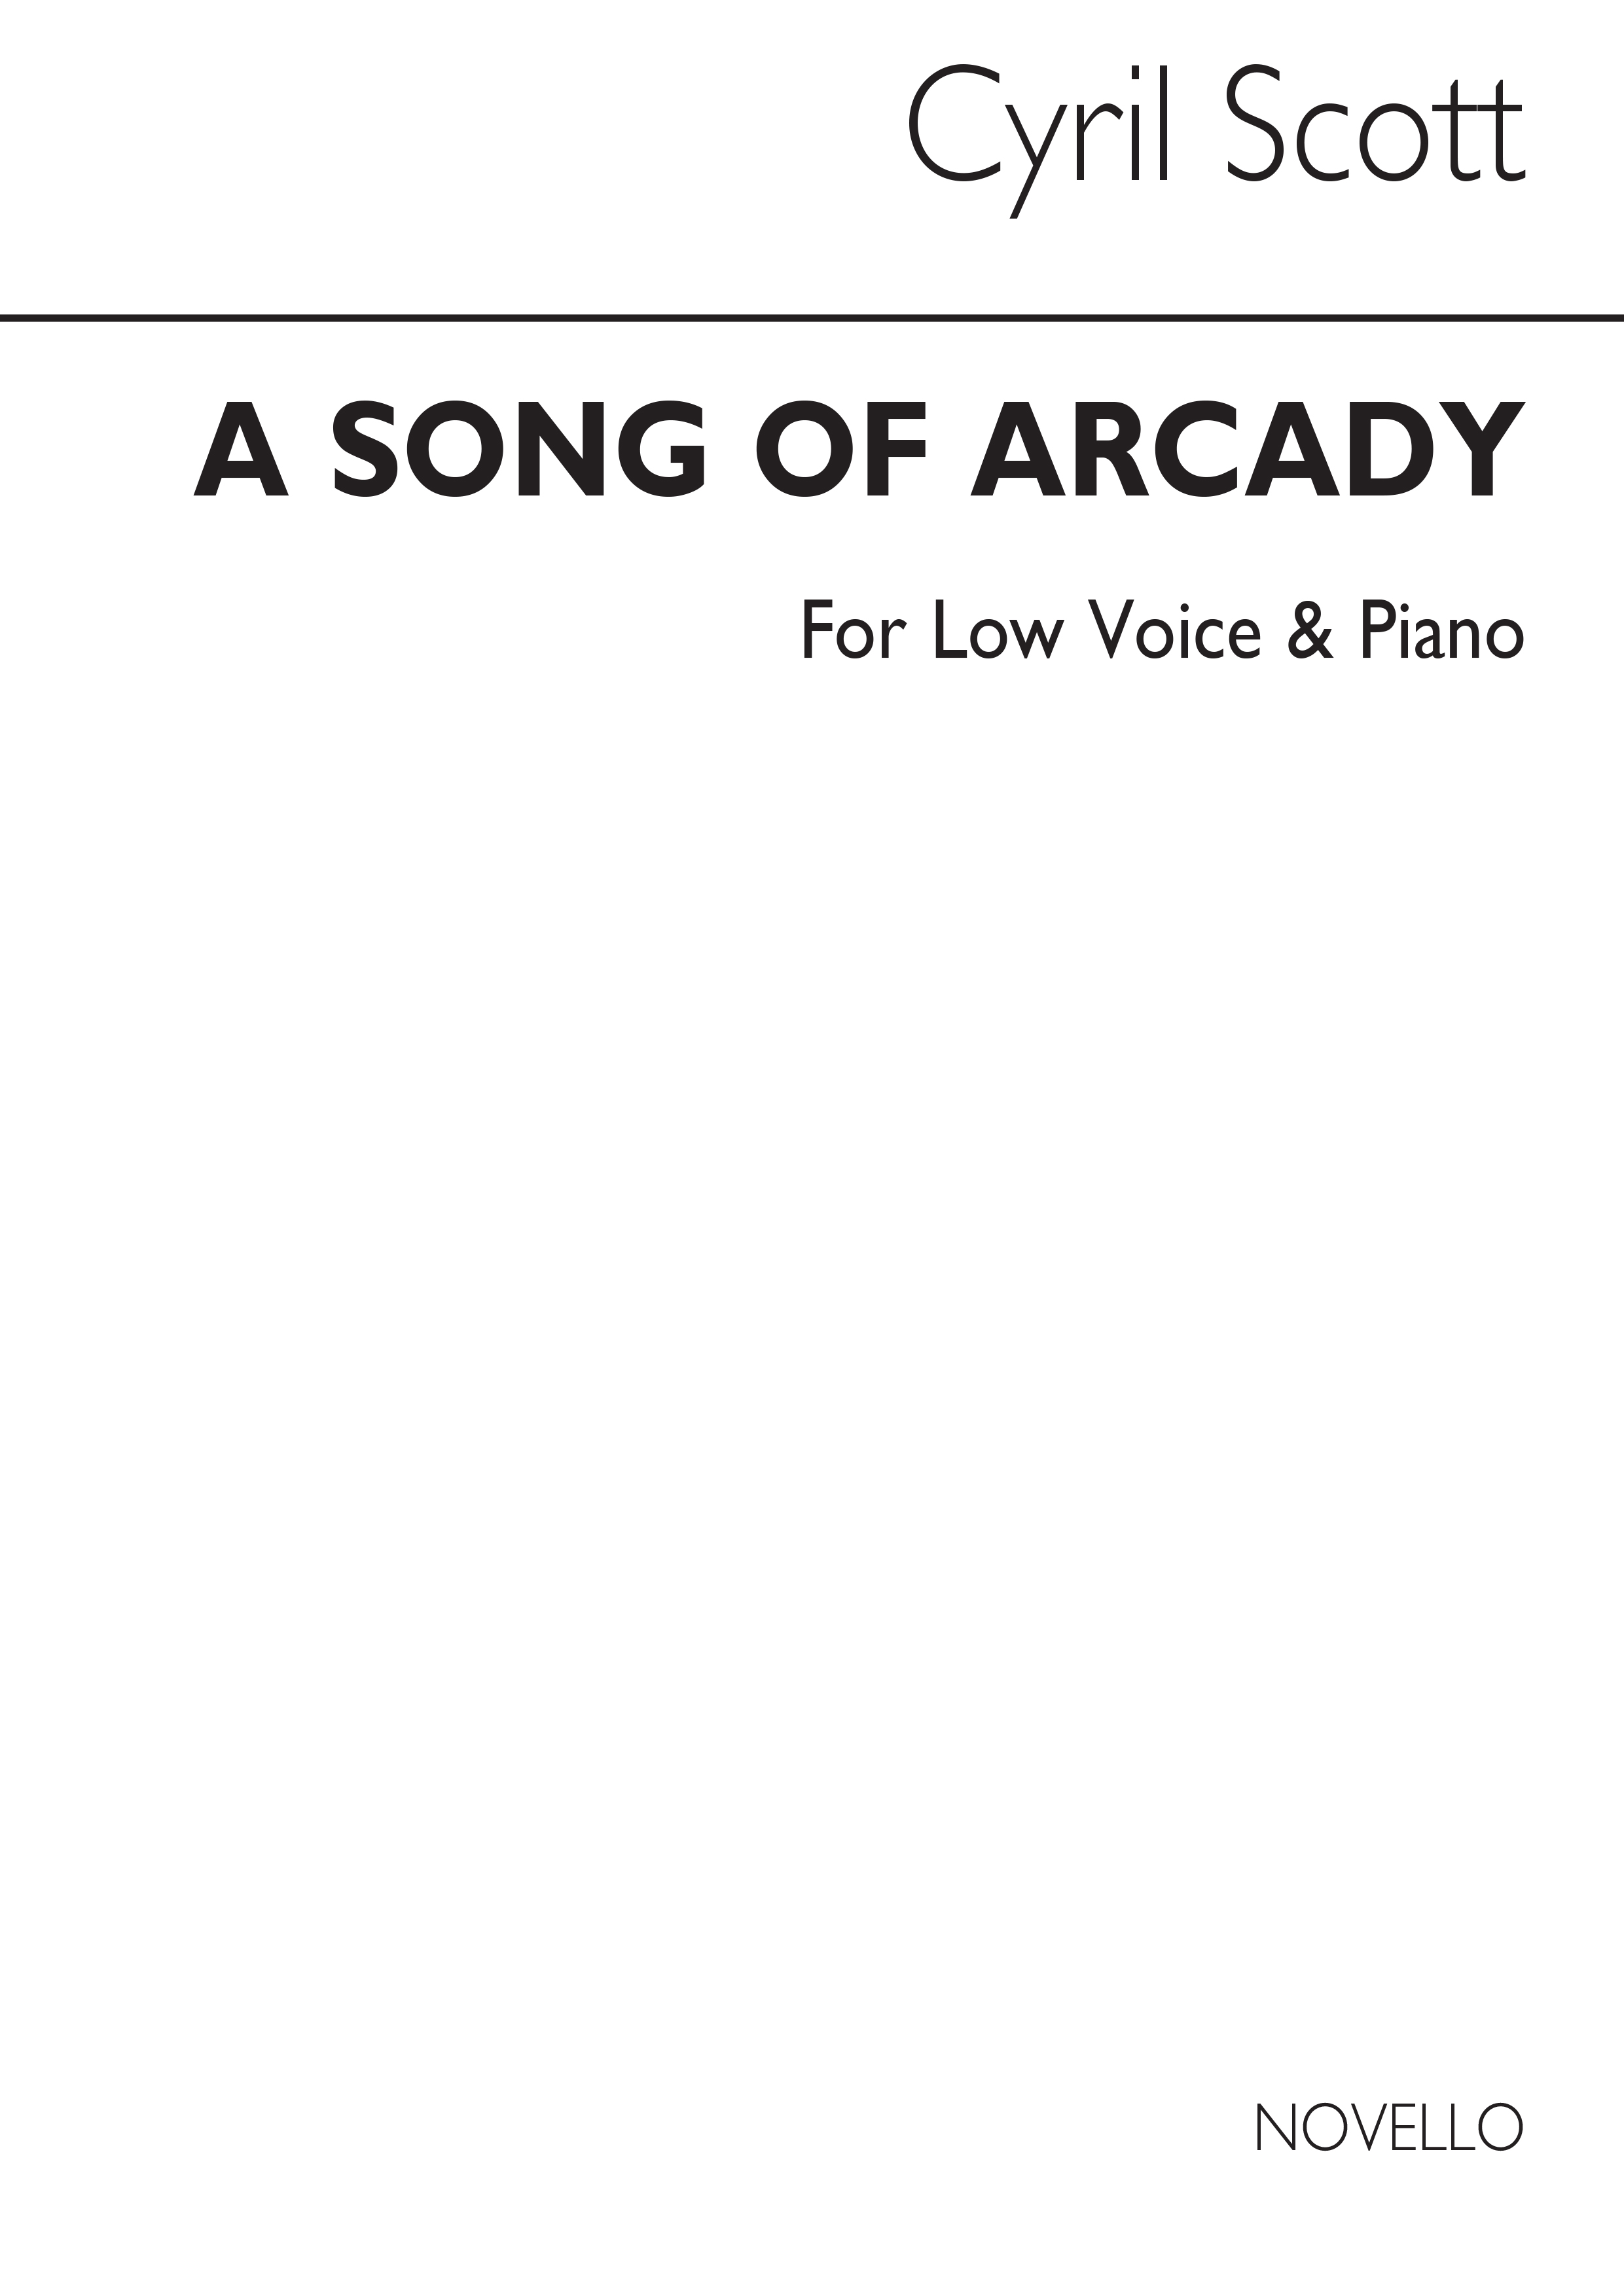 Cyril Scott: A Song Of Arcady-low Voice/Piano (Key-d)